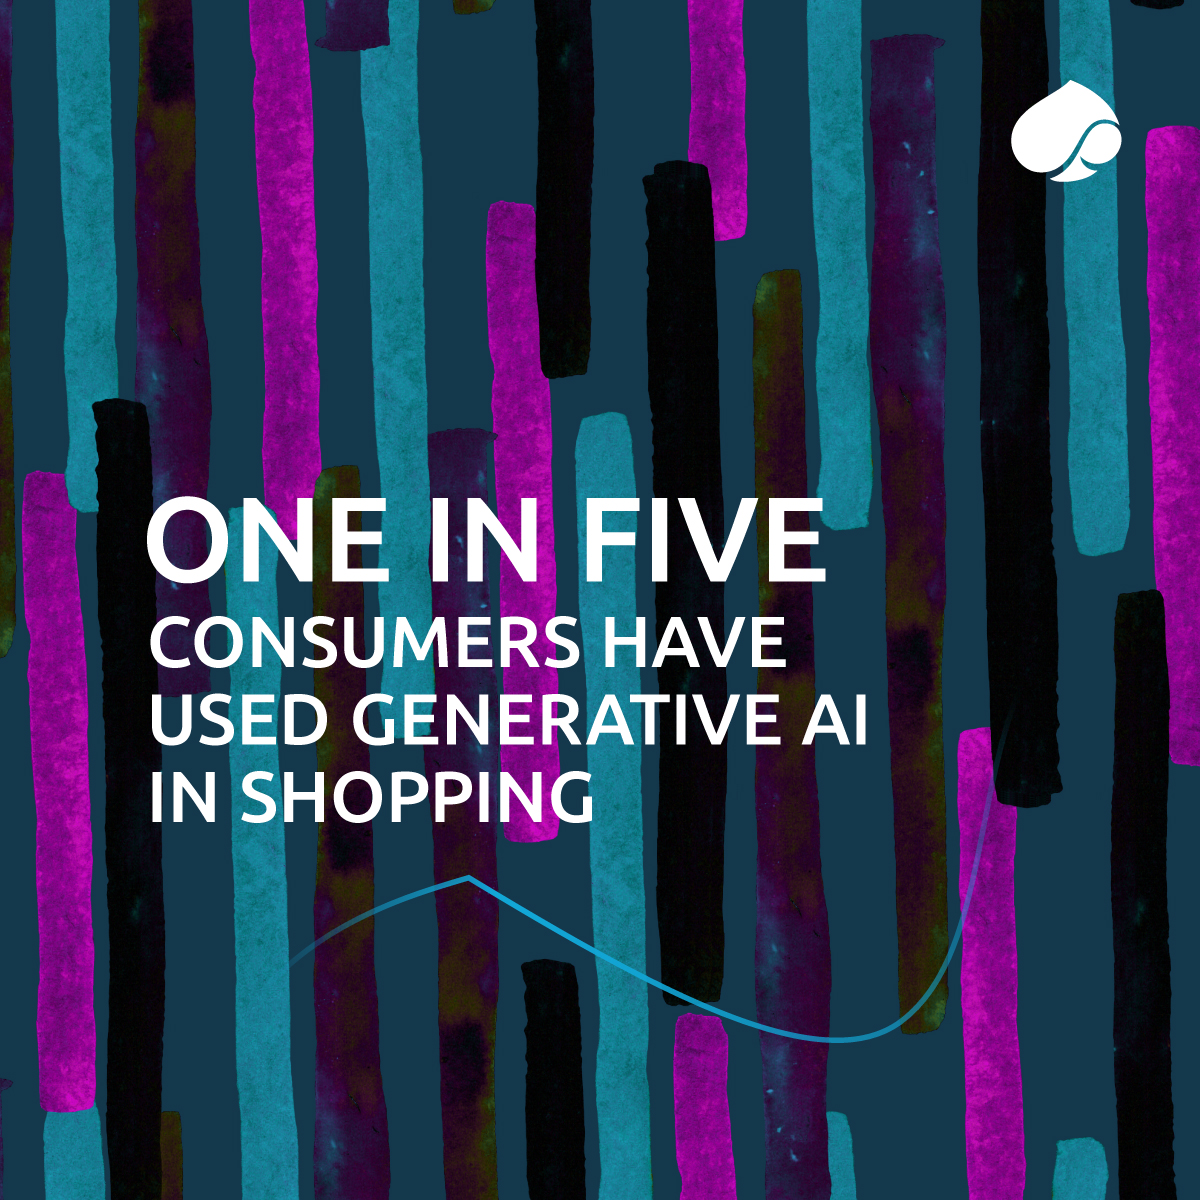 #DYK #GenerativeAI is not just used by Gen Z, but by consumers across generations for their #ShoppingExperience?

Download our #ConsumerTrends report to unpack more insights 📥 bit.ly/3twXxVL

#ConsumerBehavior #GenAI